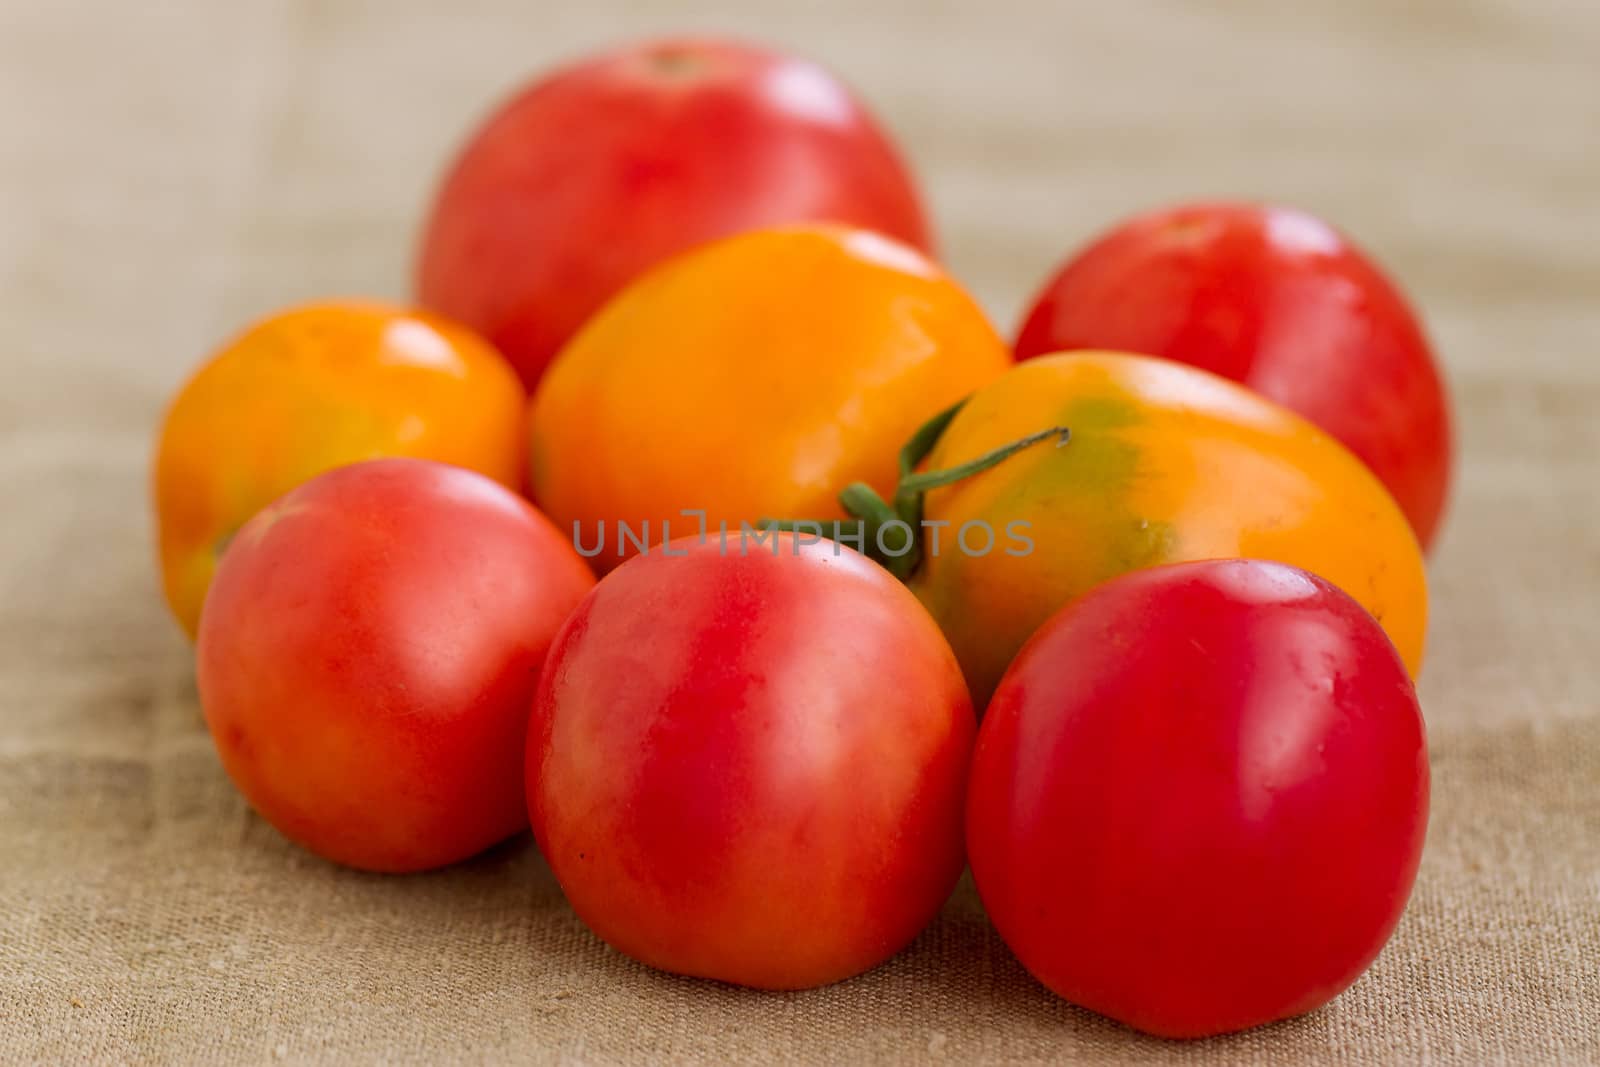 Yellow and red tomatoes lie neidelnye heap on sacking